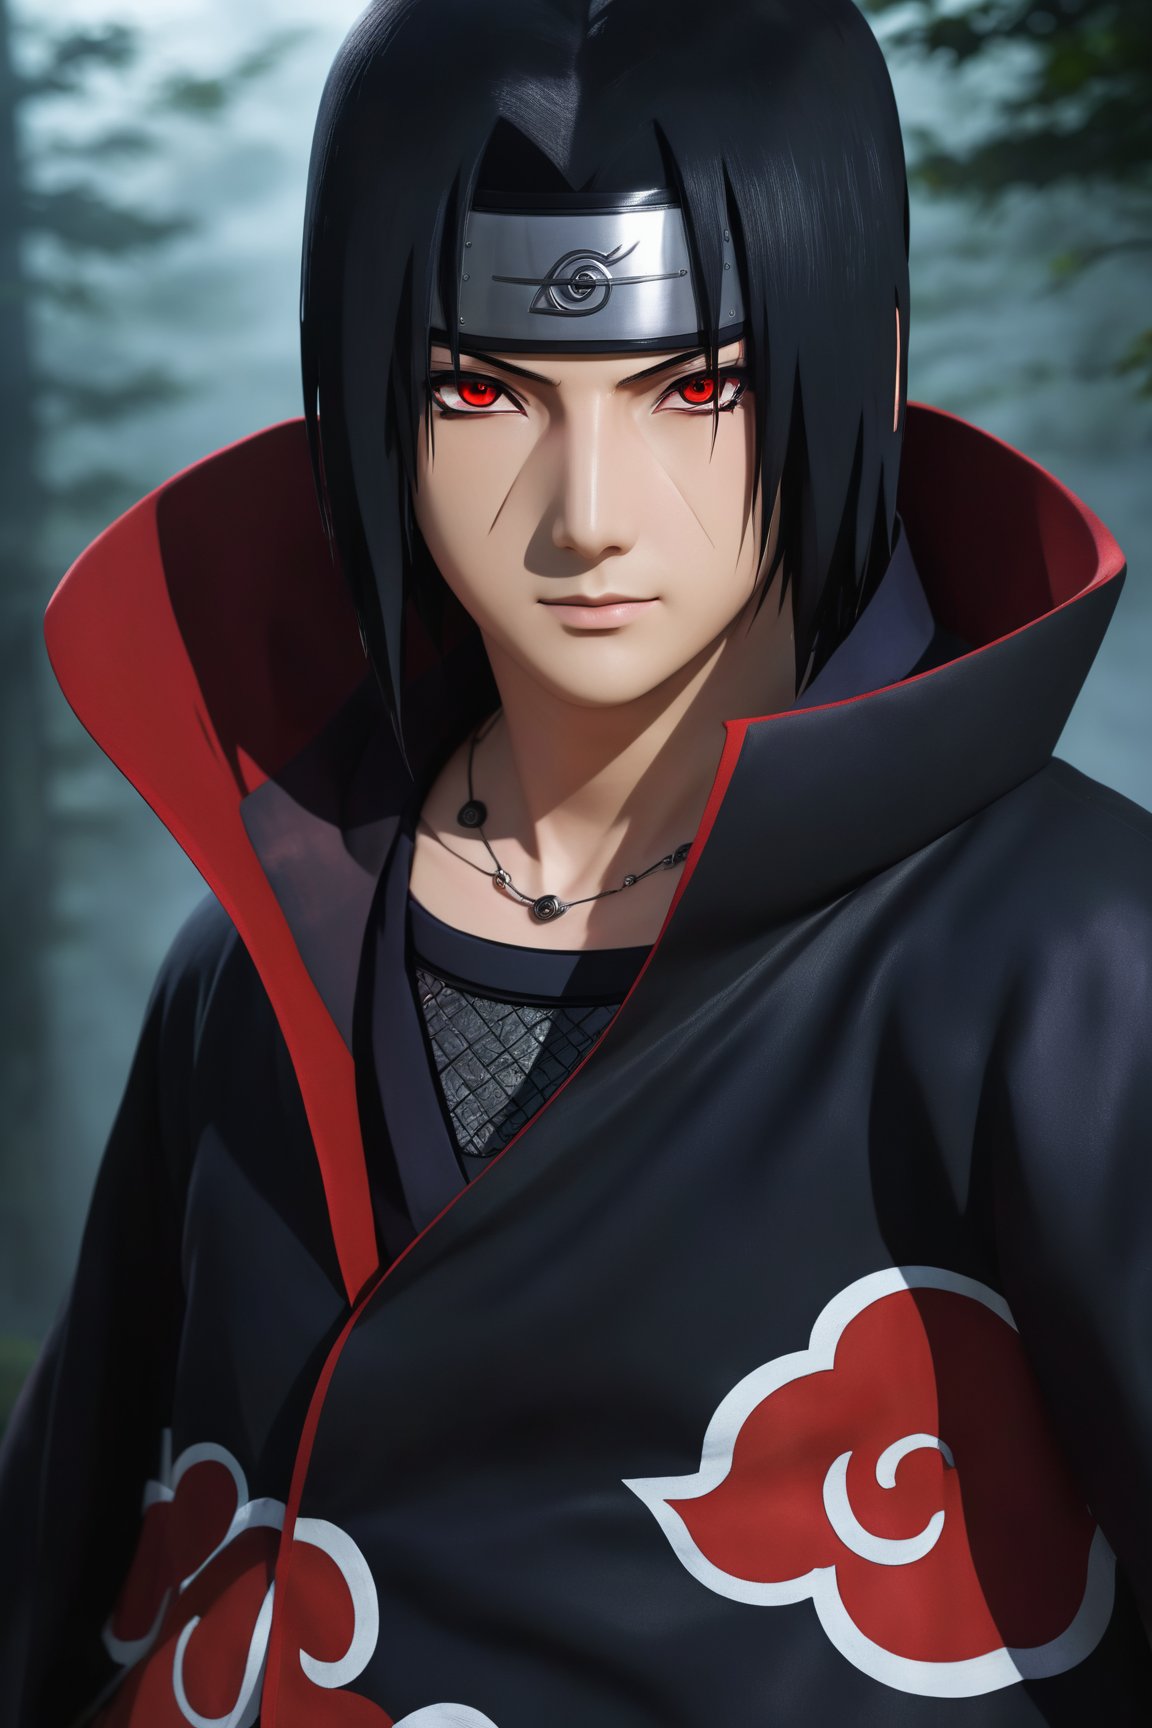 Itachi Uchiha,3D realistic portrait, mesmerizing eyes,detailed facial features,intense gaze,flowing black hair,expressive eyebrows,sharp sharingan,subtle smile,mysterious aura,unique attire,smooth skin texture,high-definition rendering,perfect lighting,layered shadows,dramatic color scheme,additional fog effect,attention to minute details,striking contrast,breathtaking artistry,masterpiece quality.